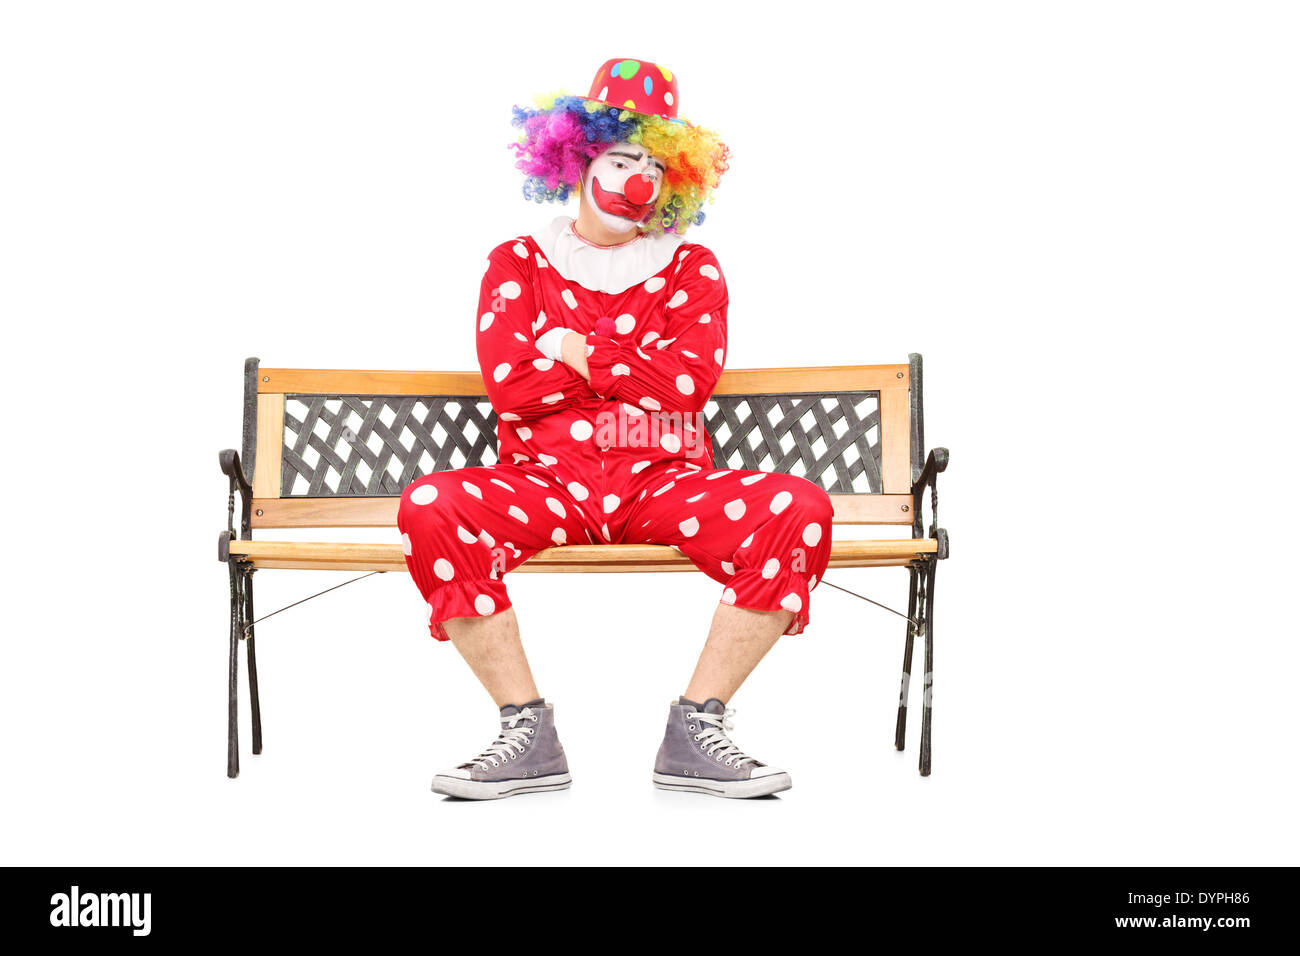 Unhappy clown sitting on a wooden bench Stock Photo